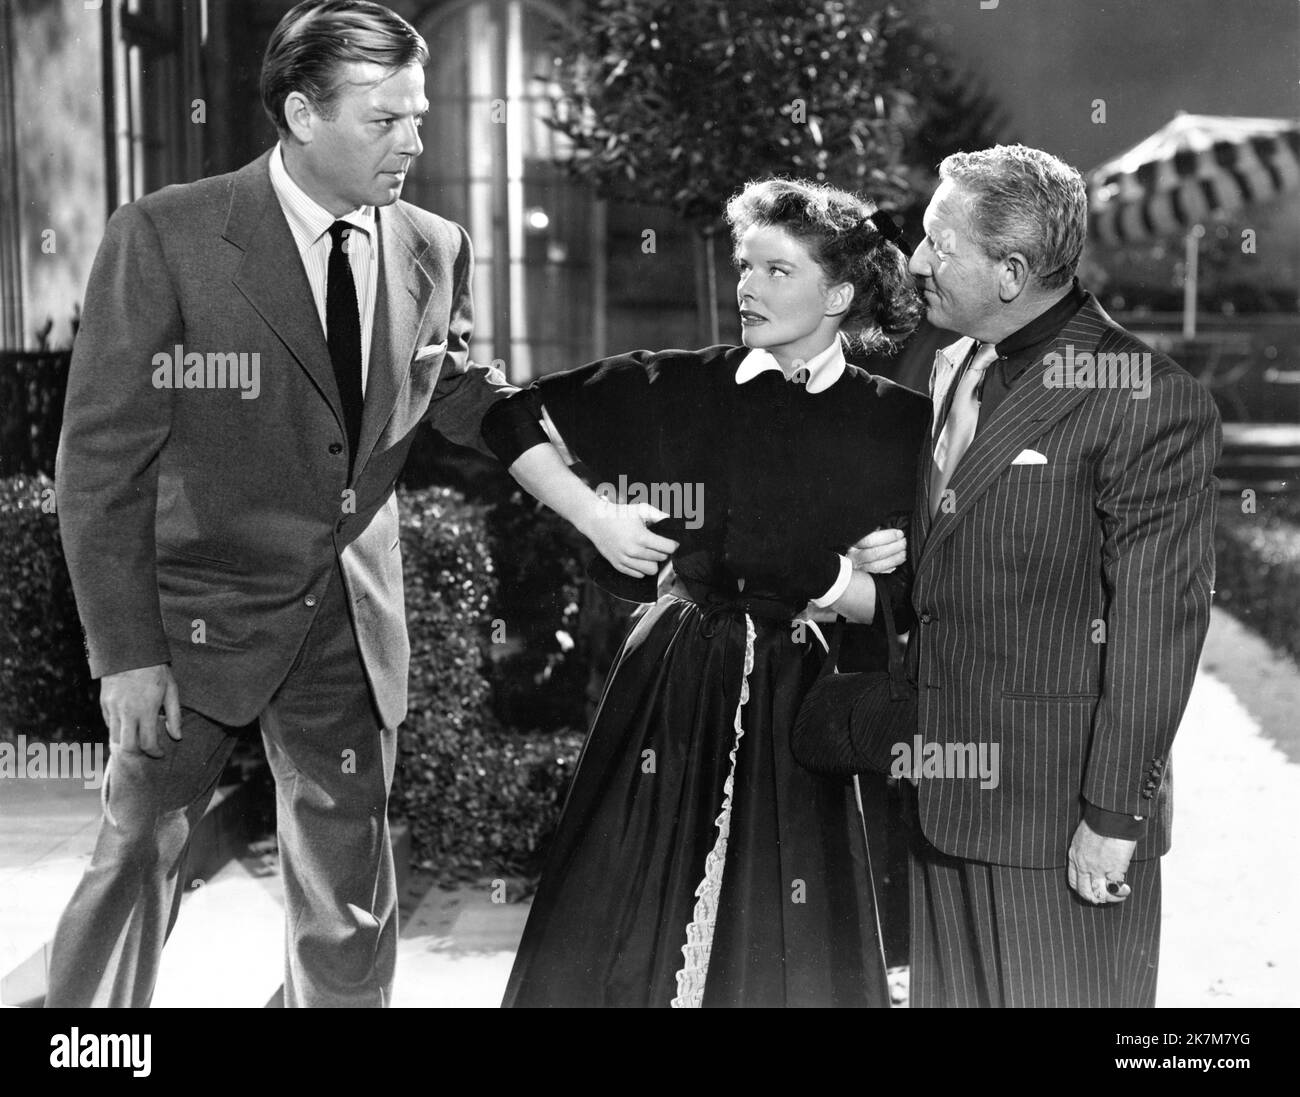 WILLIAM CHING KATHARINE HEPBURN and SPENCER TRACY in PAT AND MIKE 1952 director GEORGE CUKOR writers Ruth Gordon and Garson Kanin producer Lawrence Weingarten Metro Goldwyn Mayer Stock Photo